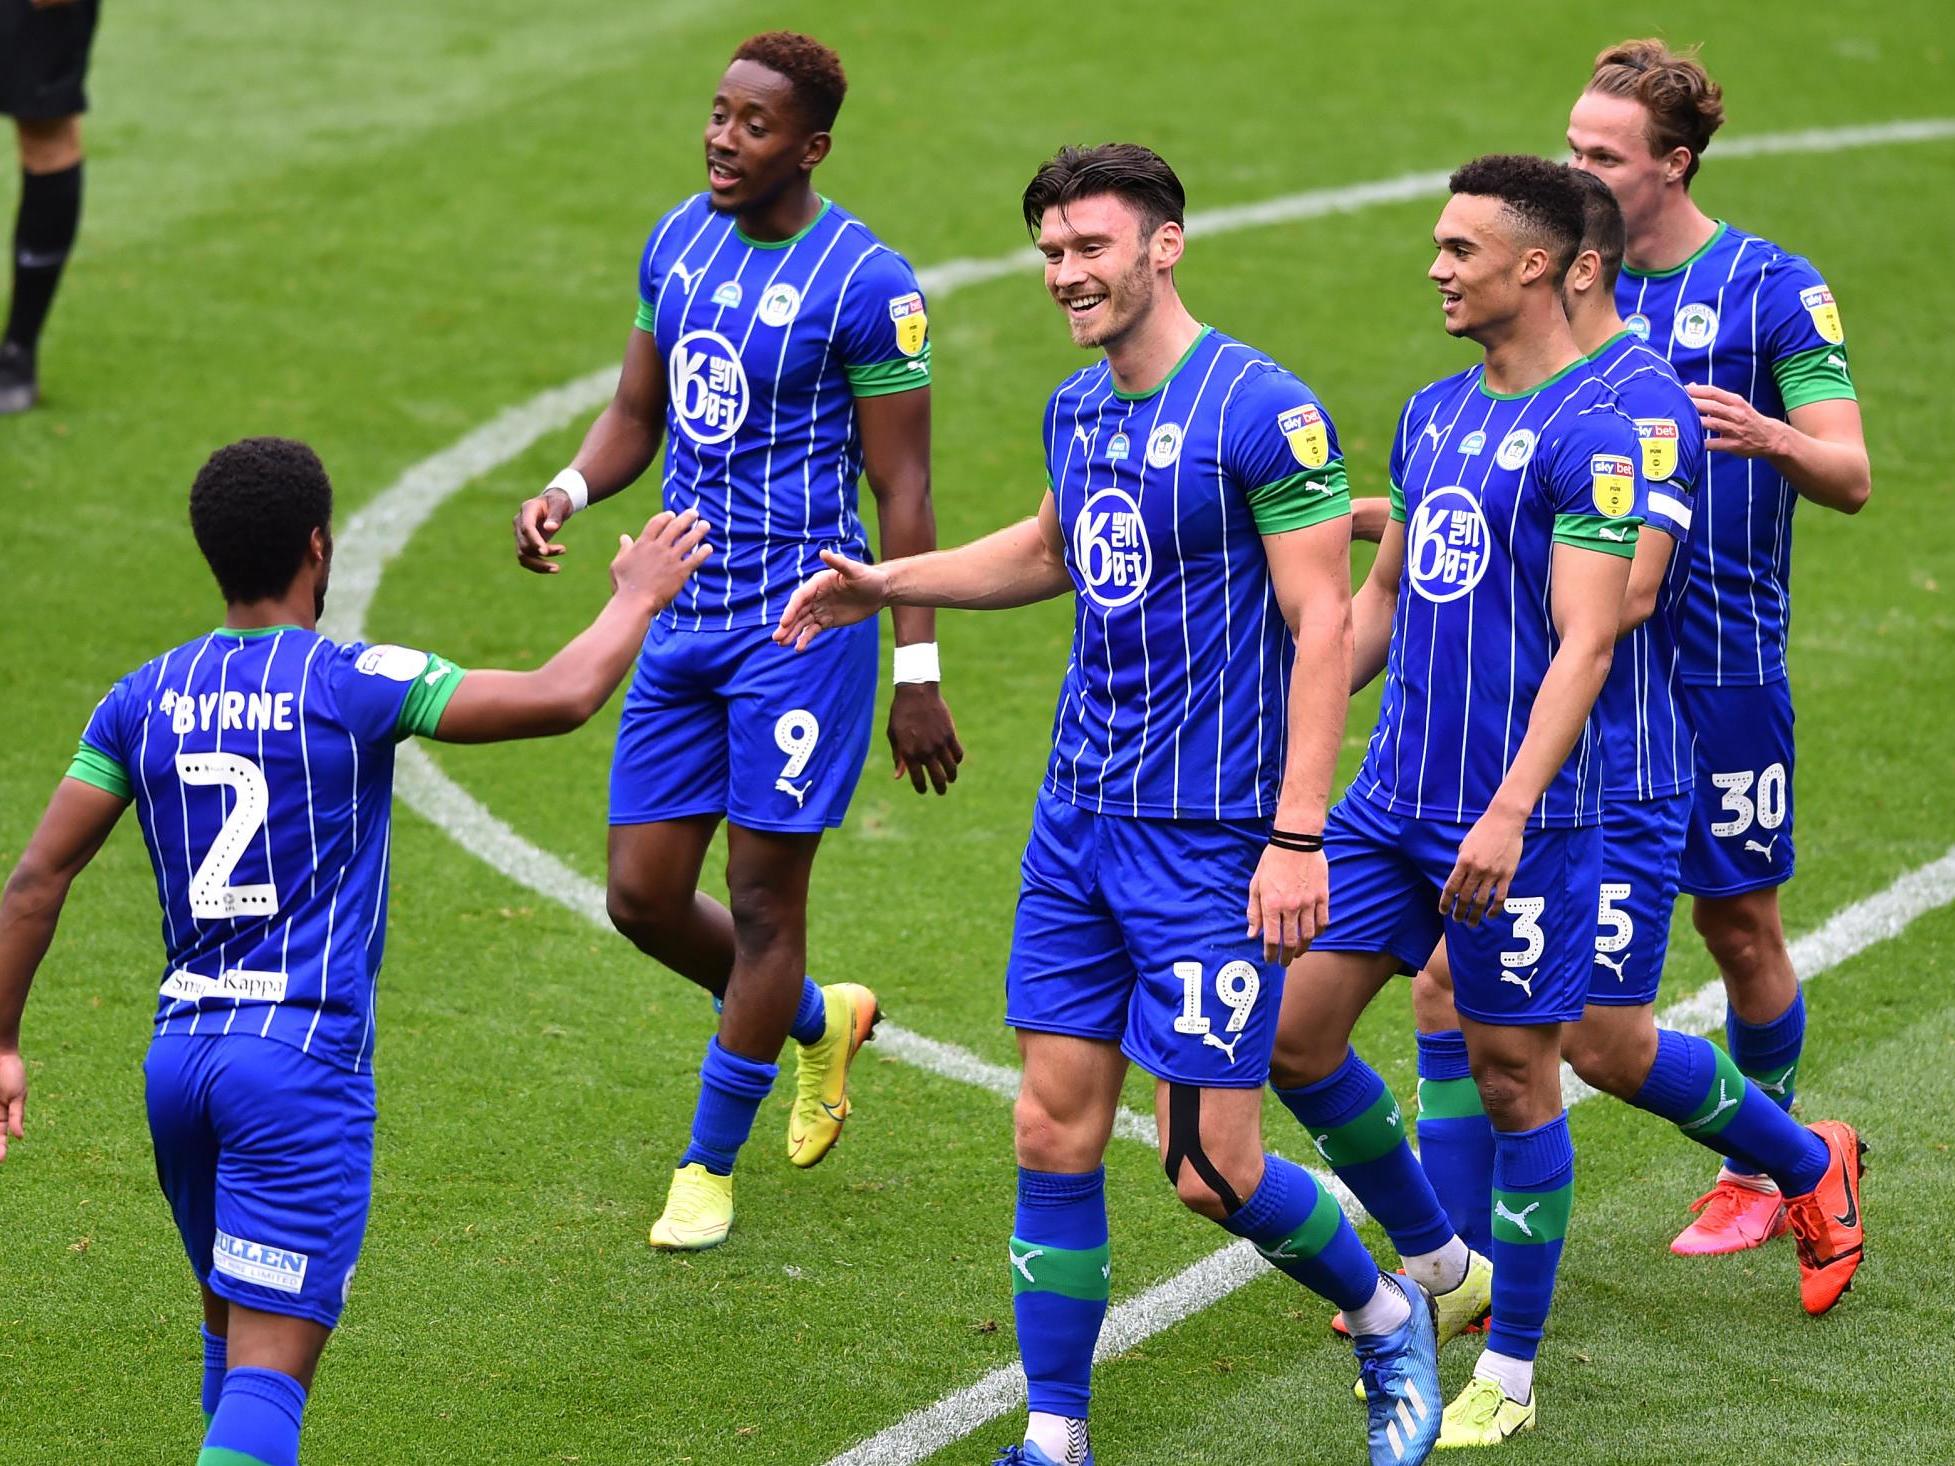 Wigan’s players are battling relegation from the Championship